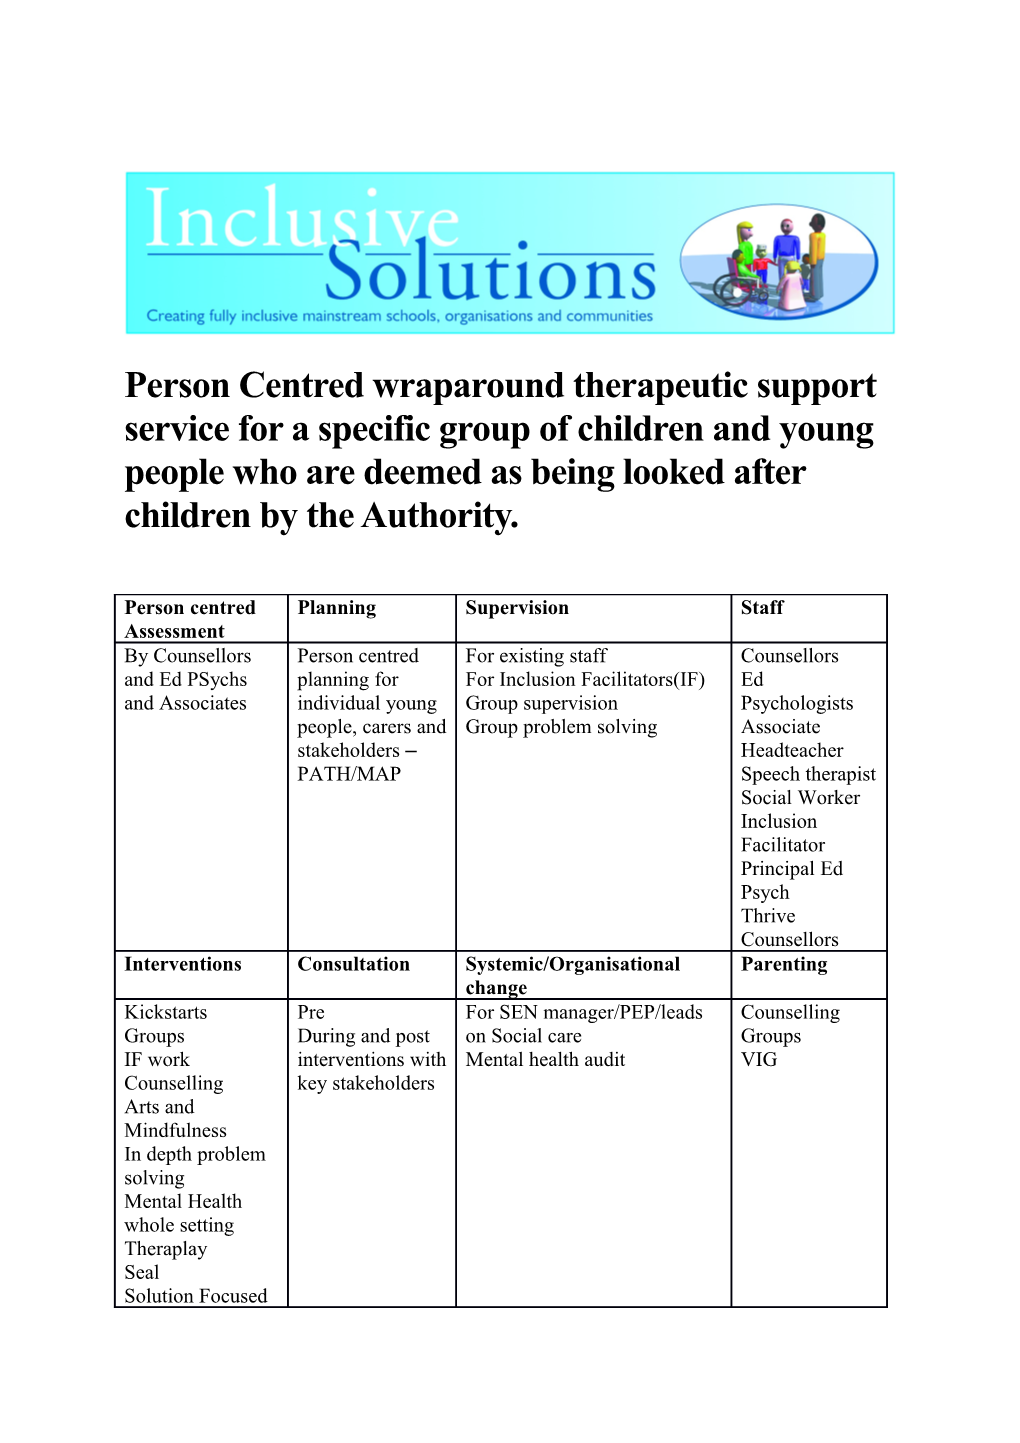 Person Centred Wraparound Therapeutic Support Service for a Specific Group of Children